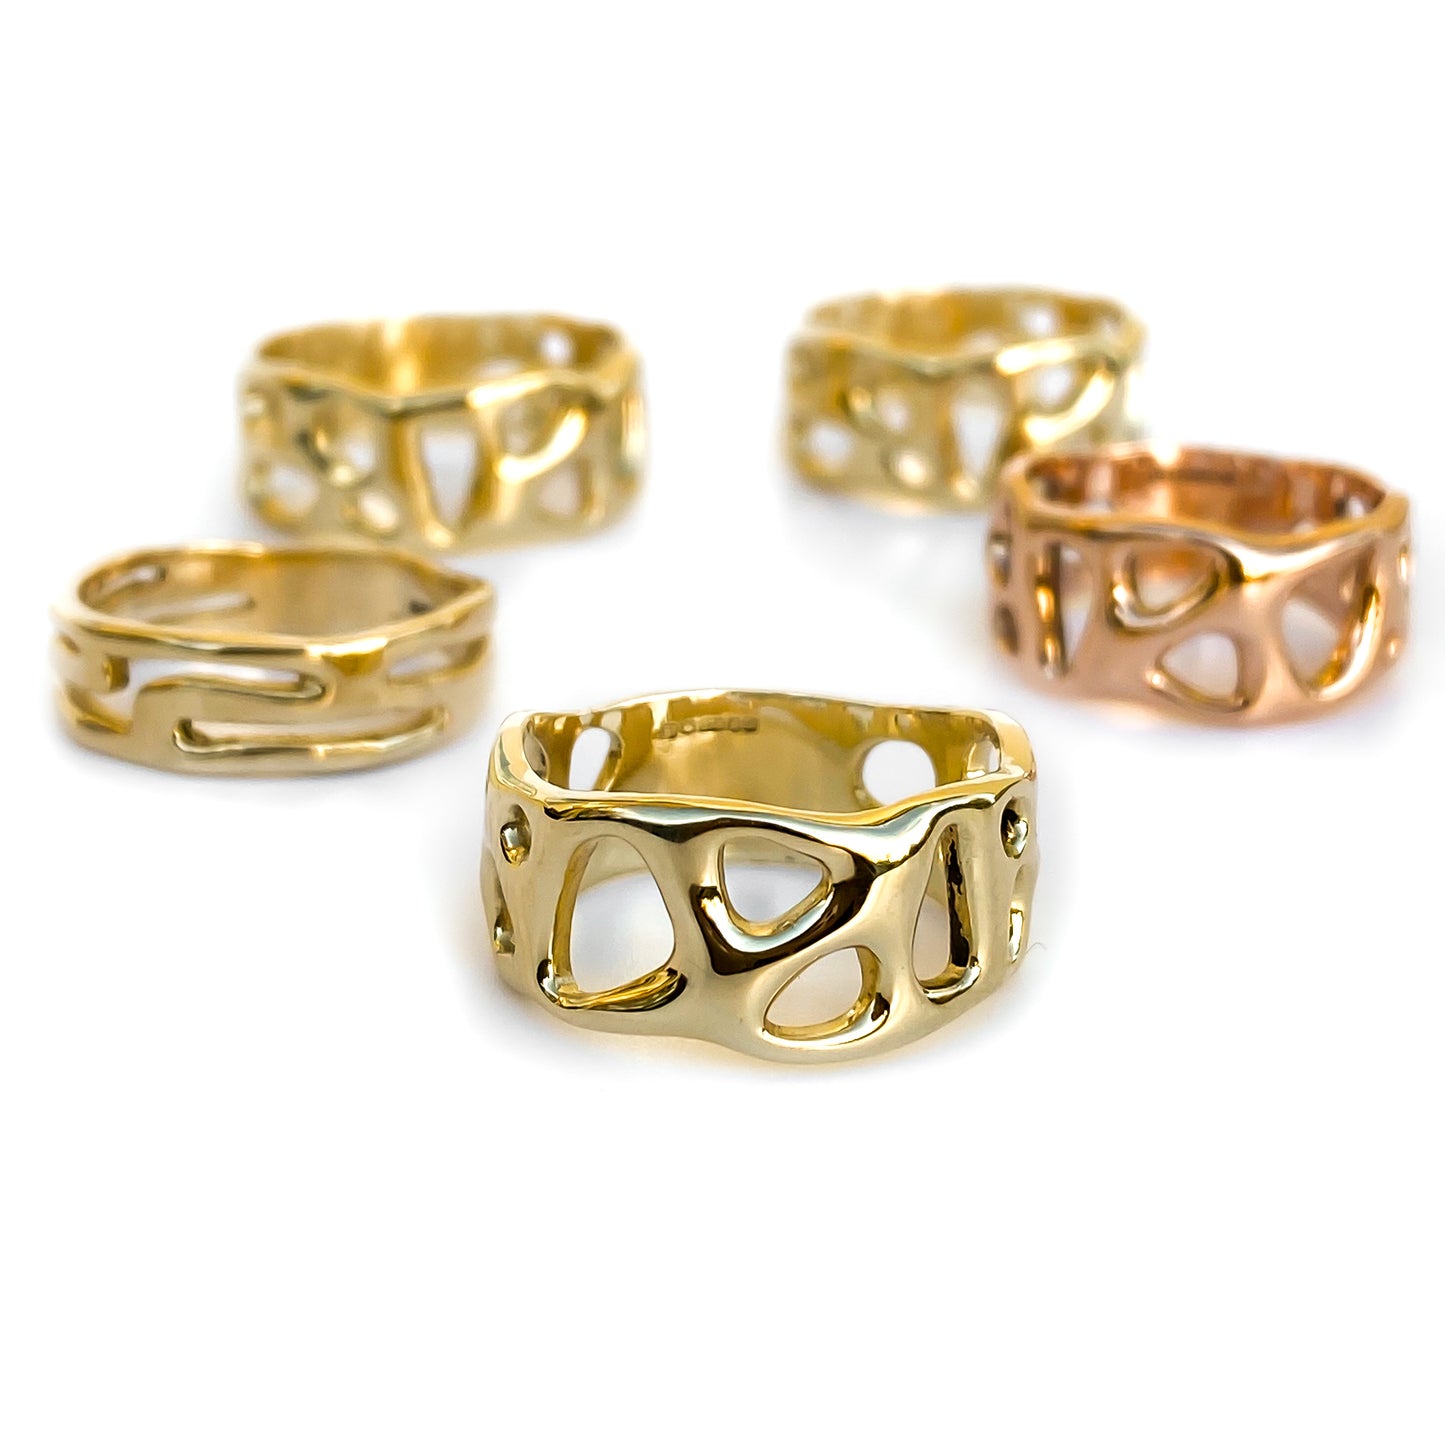 Gold Infinity Ring - Yellow, Rose or White Gold